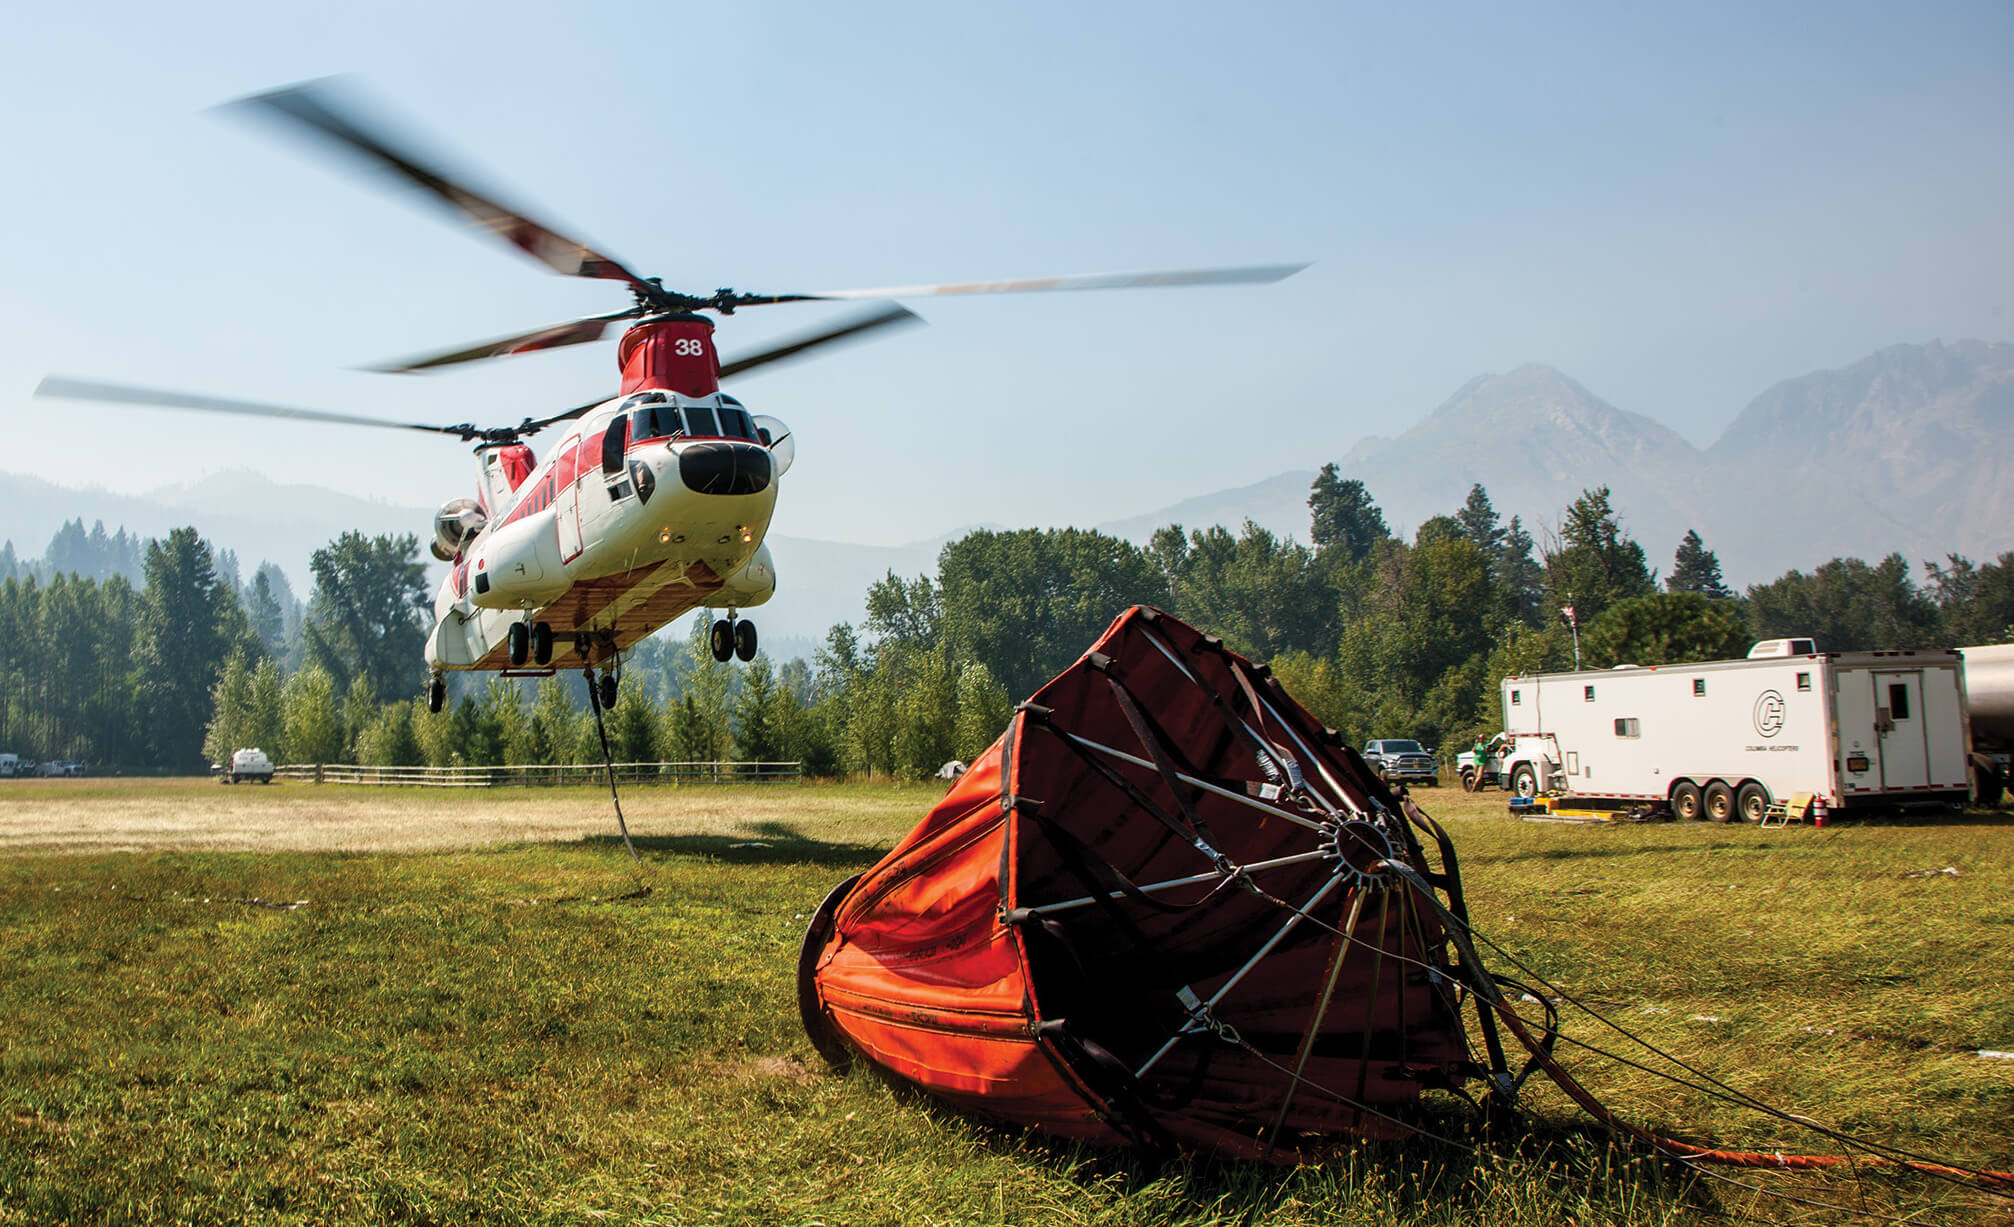 Columbia helicopter in background with firefighting bucket lying on ground